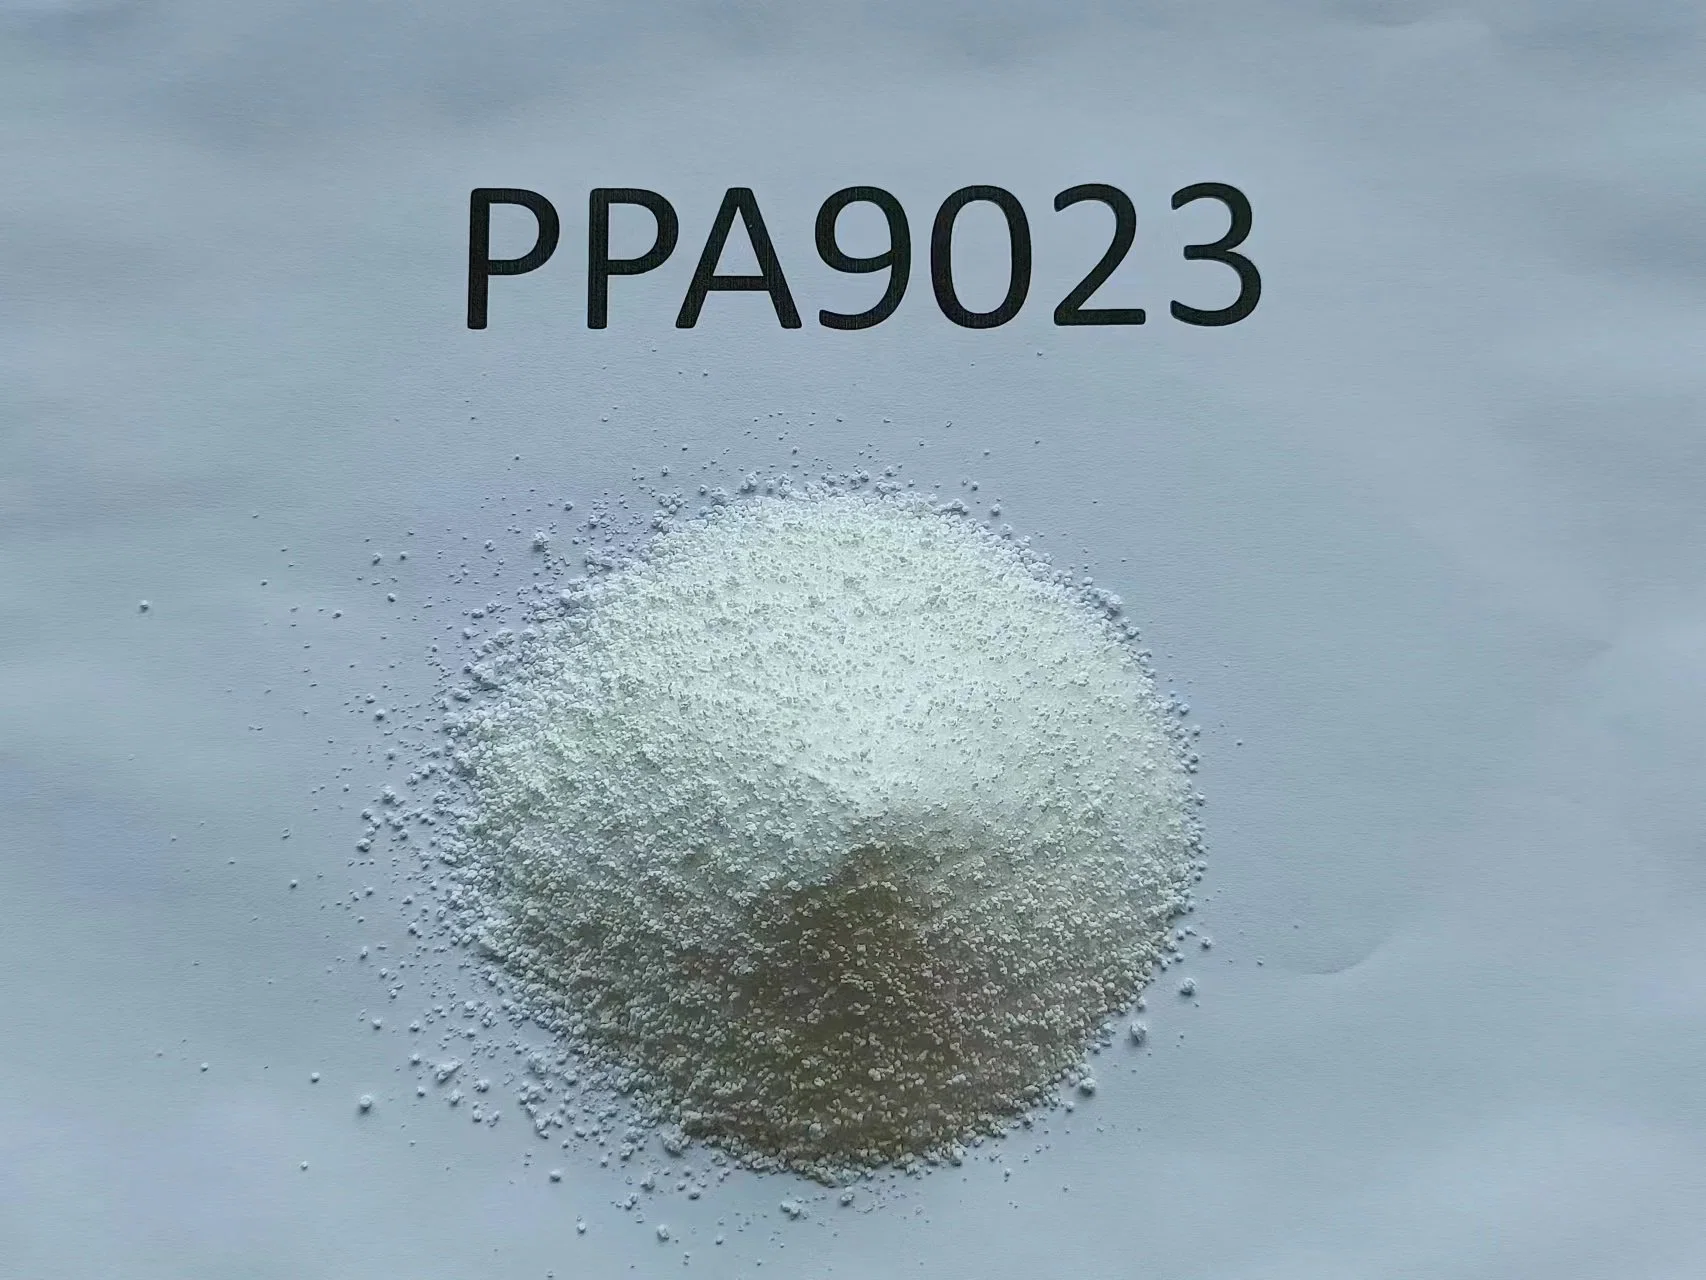 Polymer Processing Additives PPA9023; Blow Film, Cast Film, The Hollow Blow Molding Plastic Products, Pipe, Sheets, Master Batch.